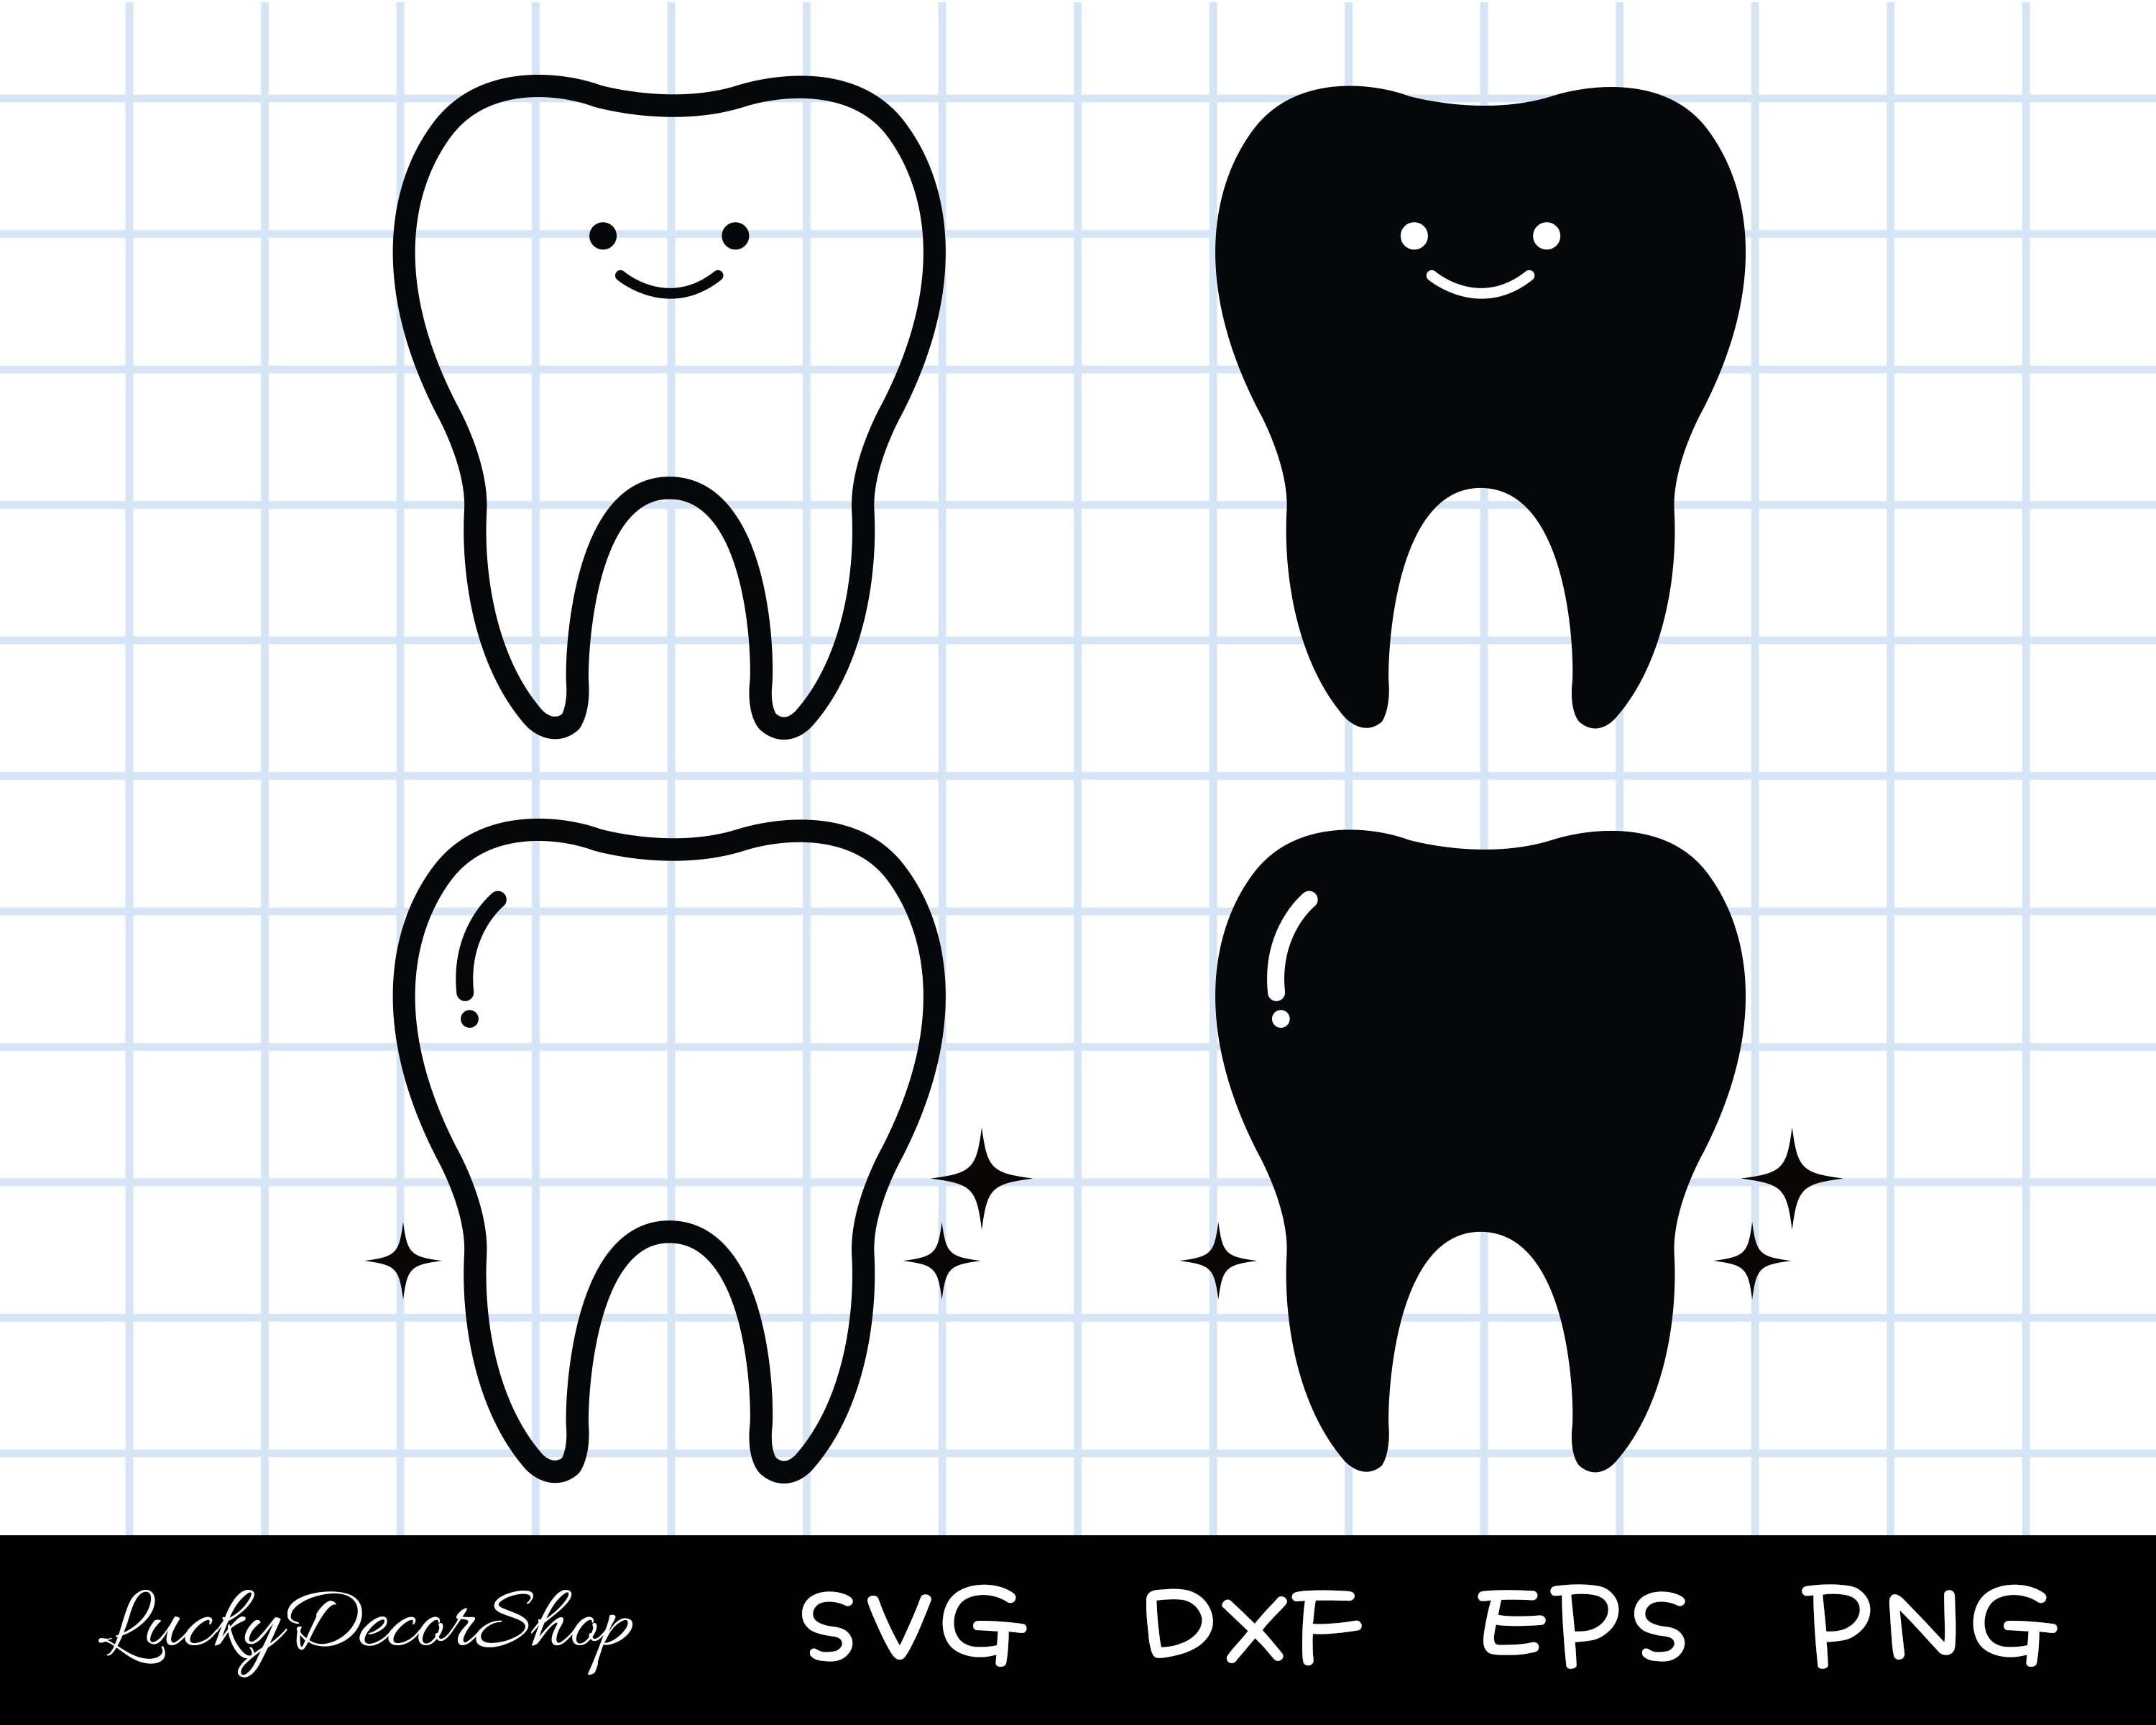 Dentist Tool SVG, Dentist Tool Svg, Dentist Svg, Dentist Tools Svg,  Clipart, Files for Cricut, Cut Files For Silhouette, Dxf, Png, Eps